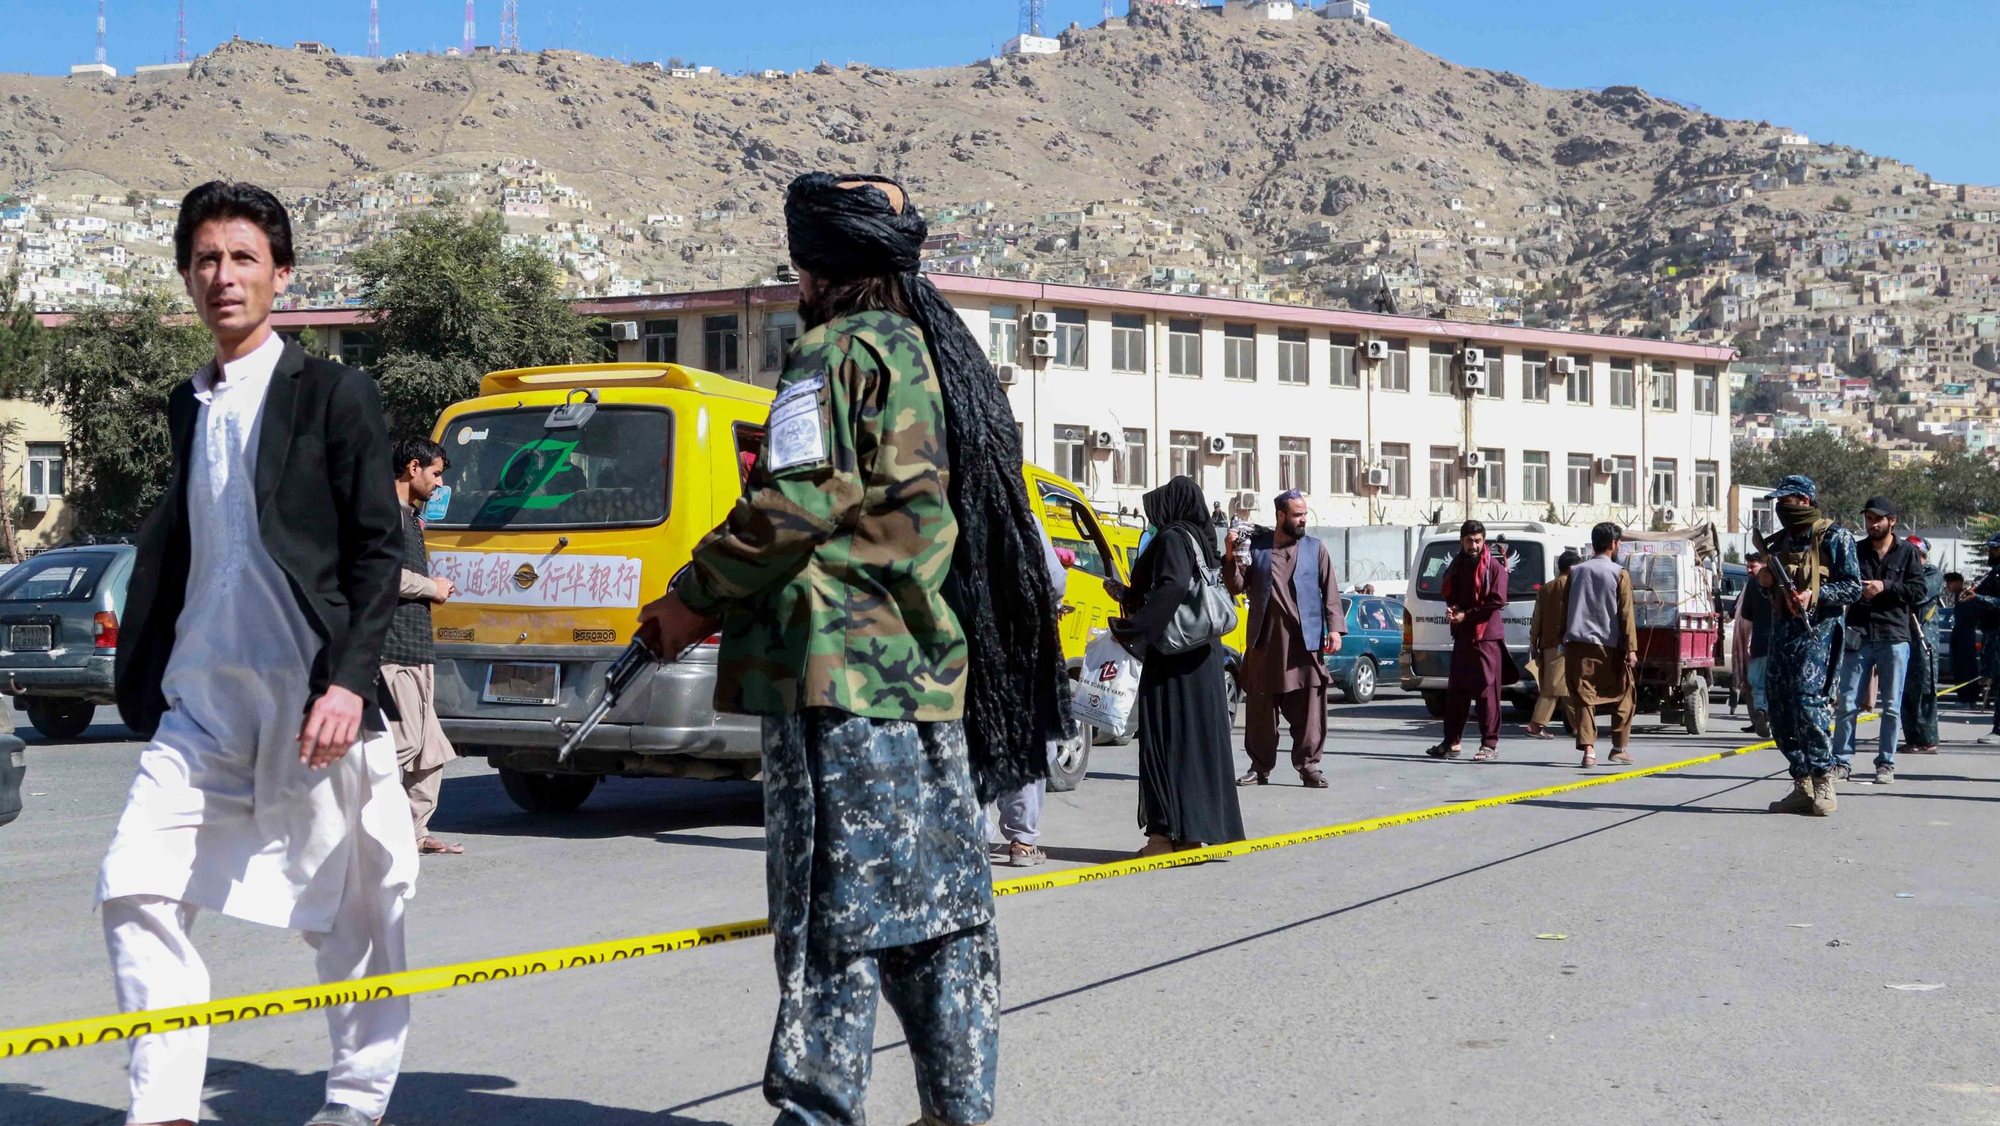 epa09534068 Taliban stand guard at the scene of a bomb blast in Kabul, Afghanistan, 20 October 2021. At least two people were killed according to the Afghan Interior Ministry in a blast that earlier rocked the Deh Mazang district in Kabul.  EPA/STRINGER